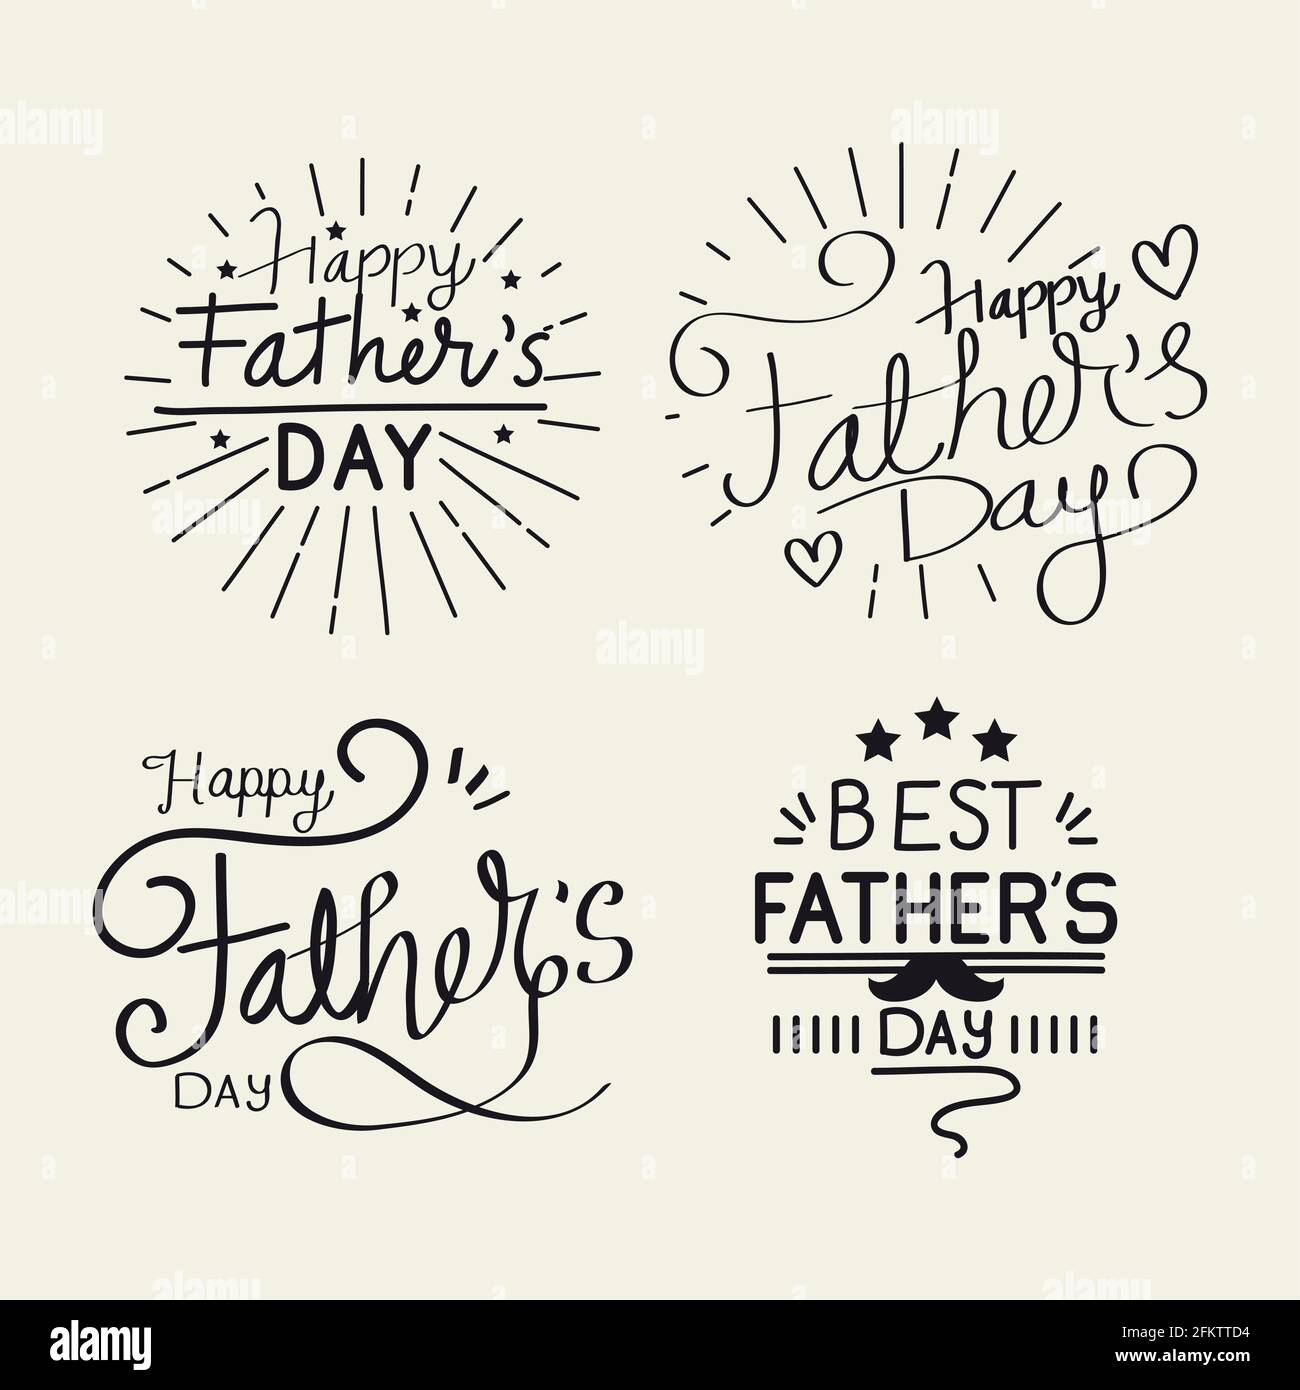 fathers days letterings Stock Vector